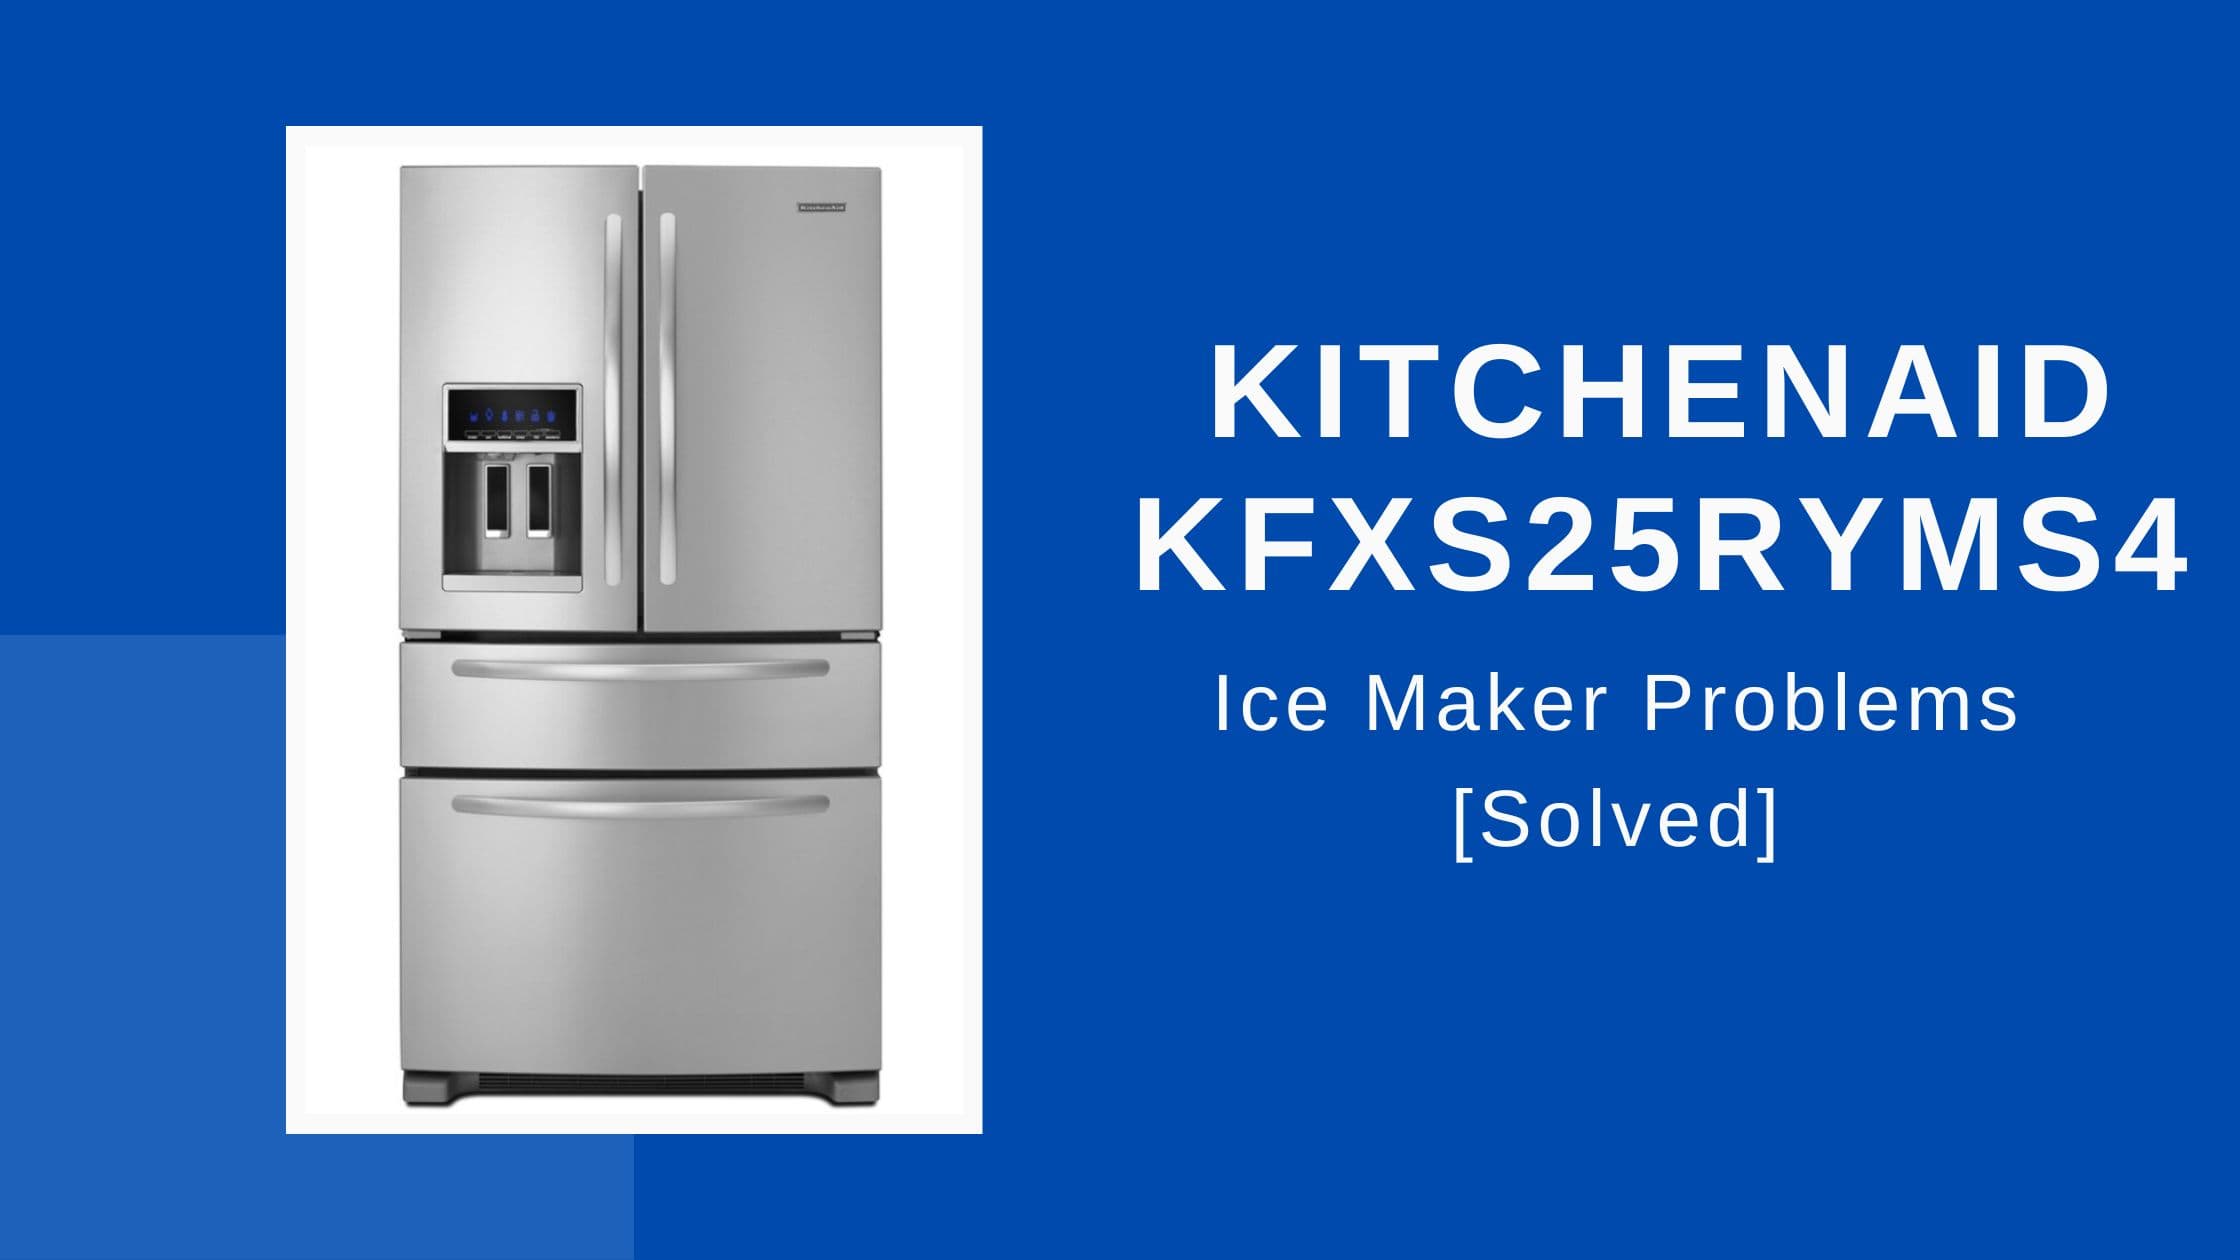 KitchenAid KFXS25RYMS4 Ice Maker Problems With Solutions